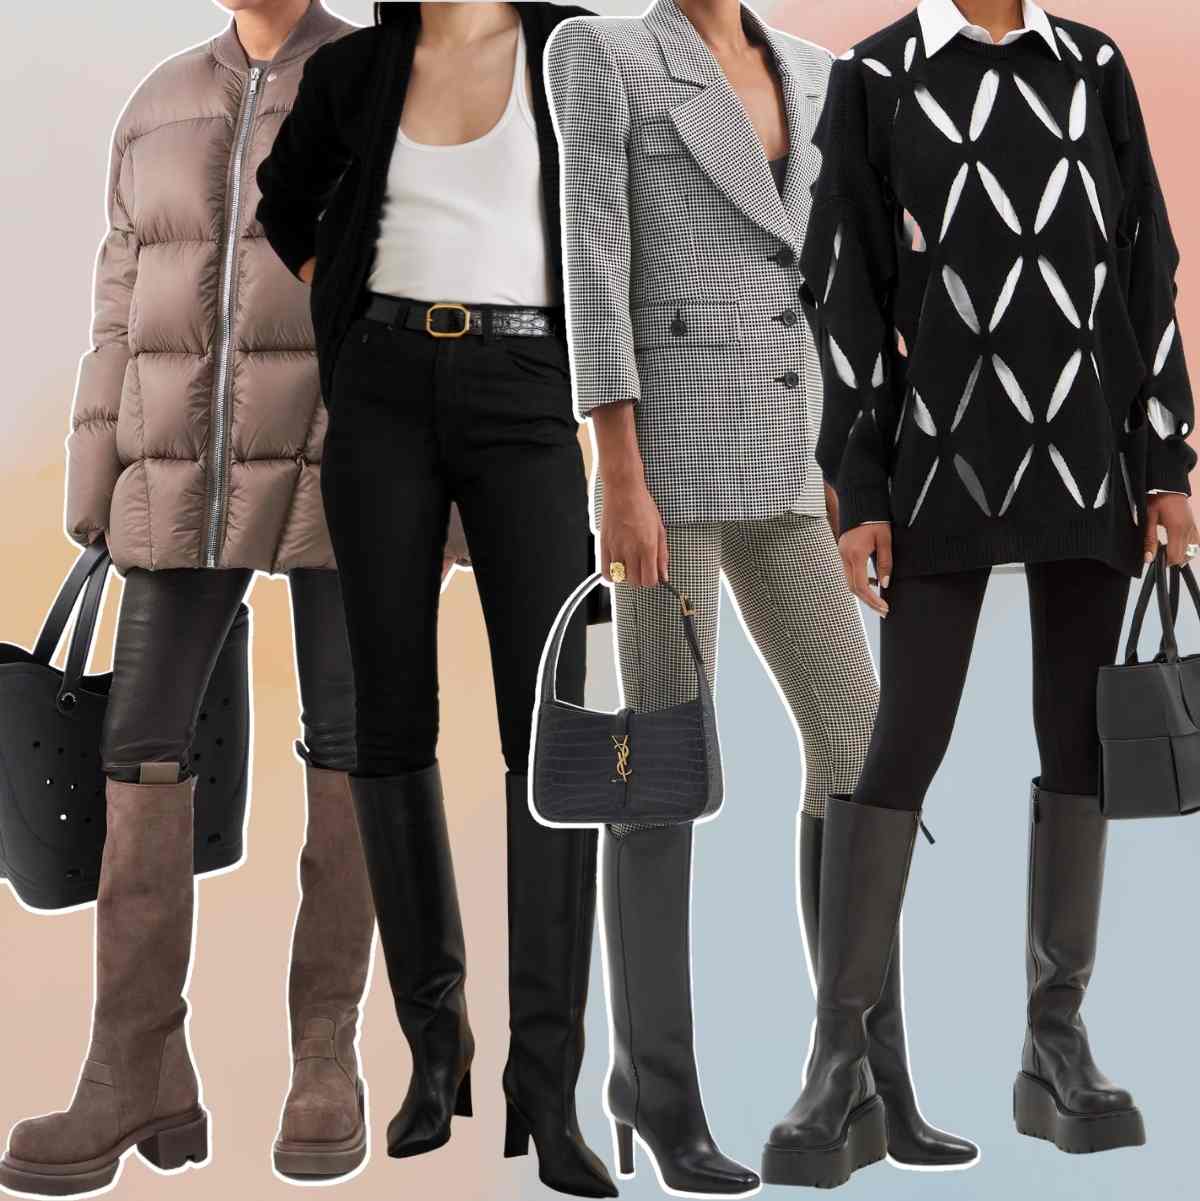 Collage of 4 women wearing different knee high boots with leggings outfits.